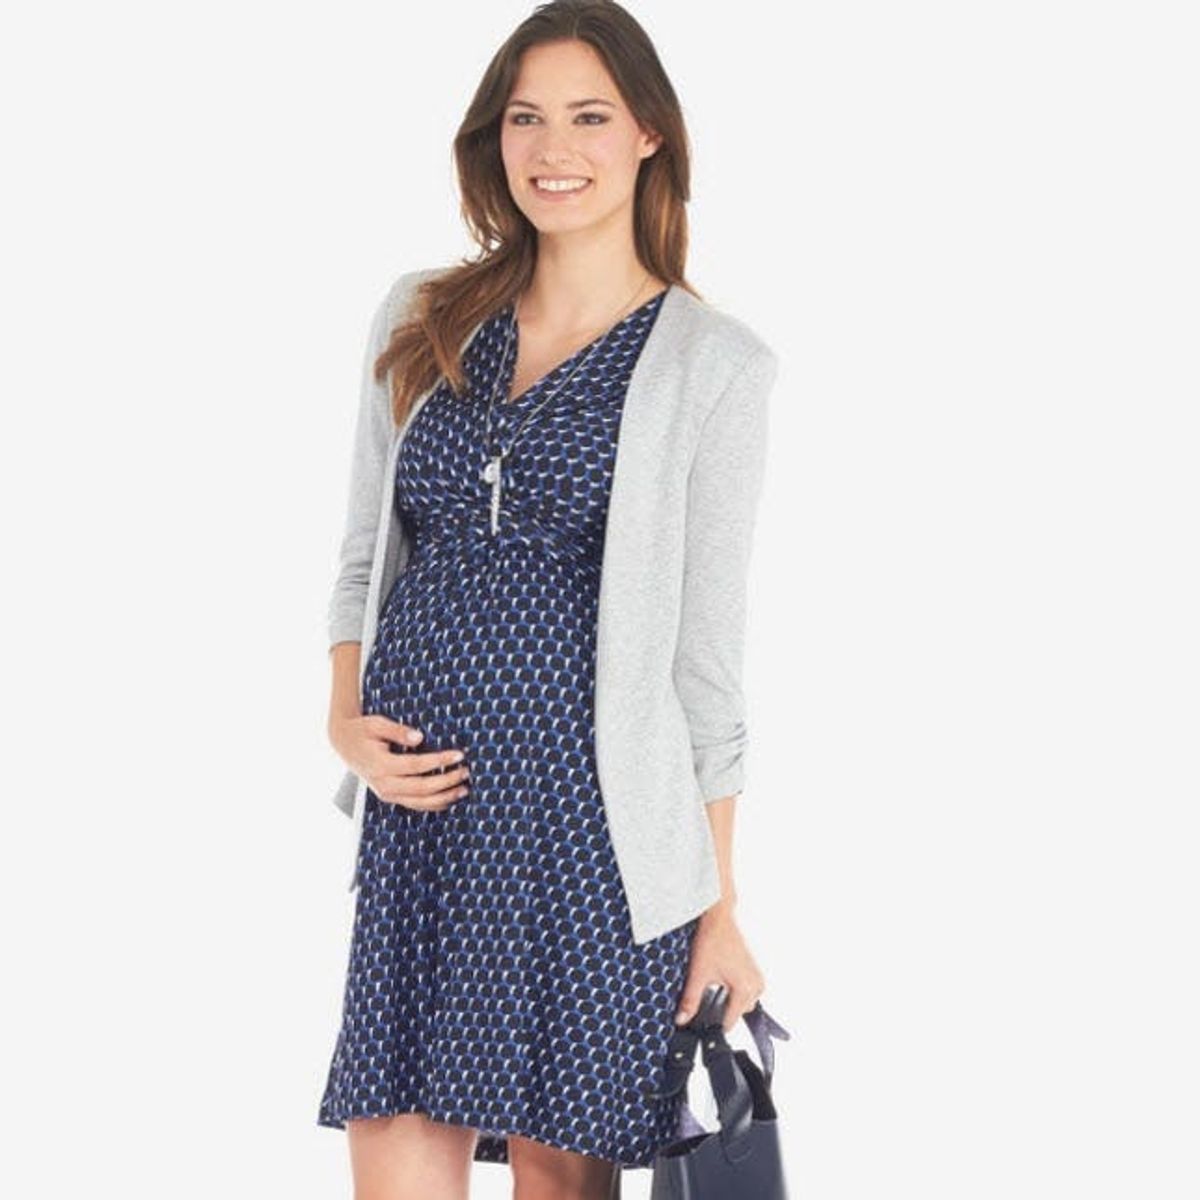 Now There’s a Stylish Subscription Service for Moms-to-Be